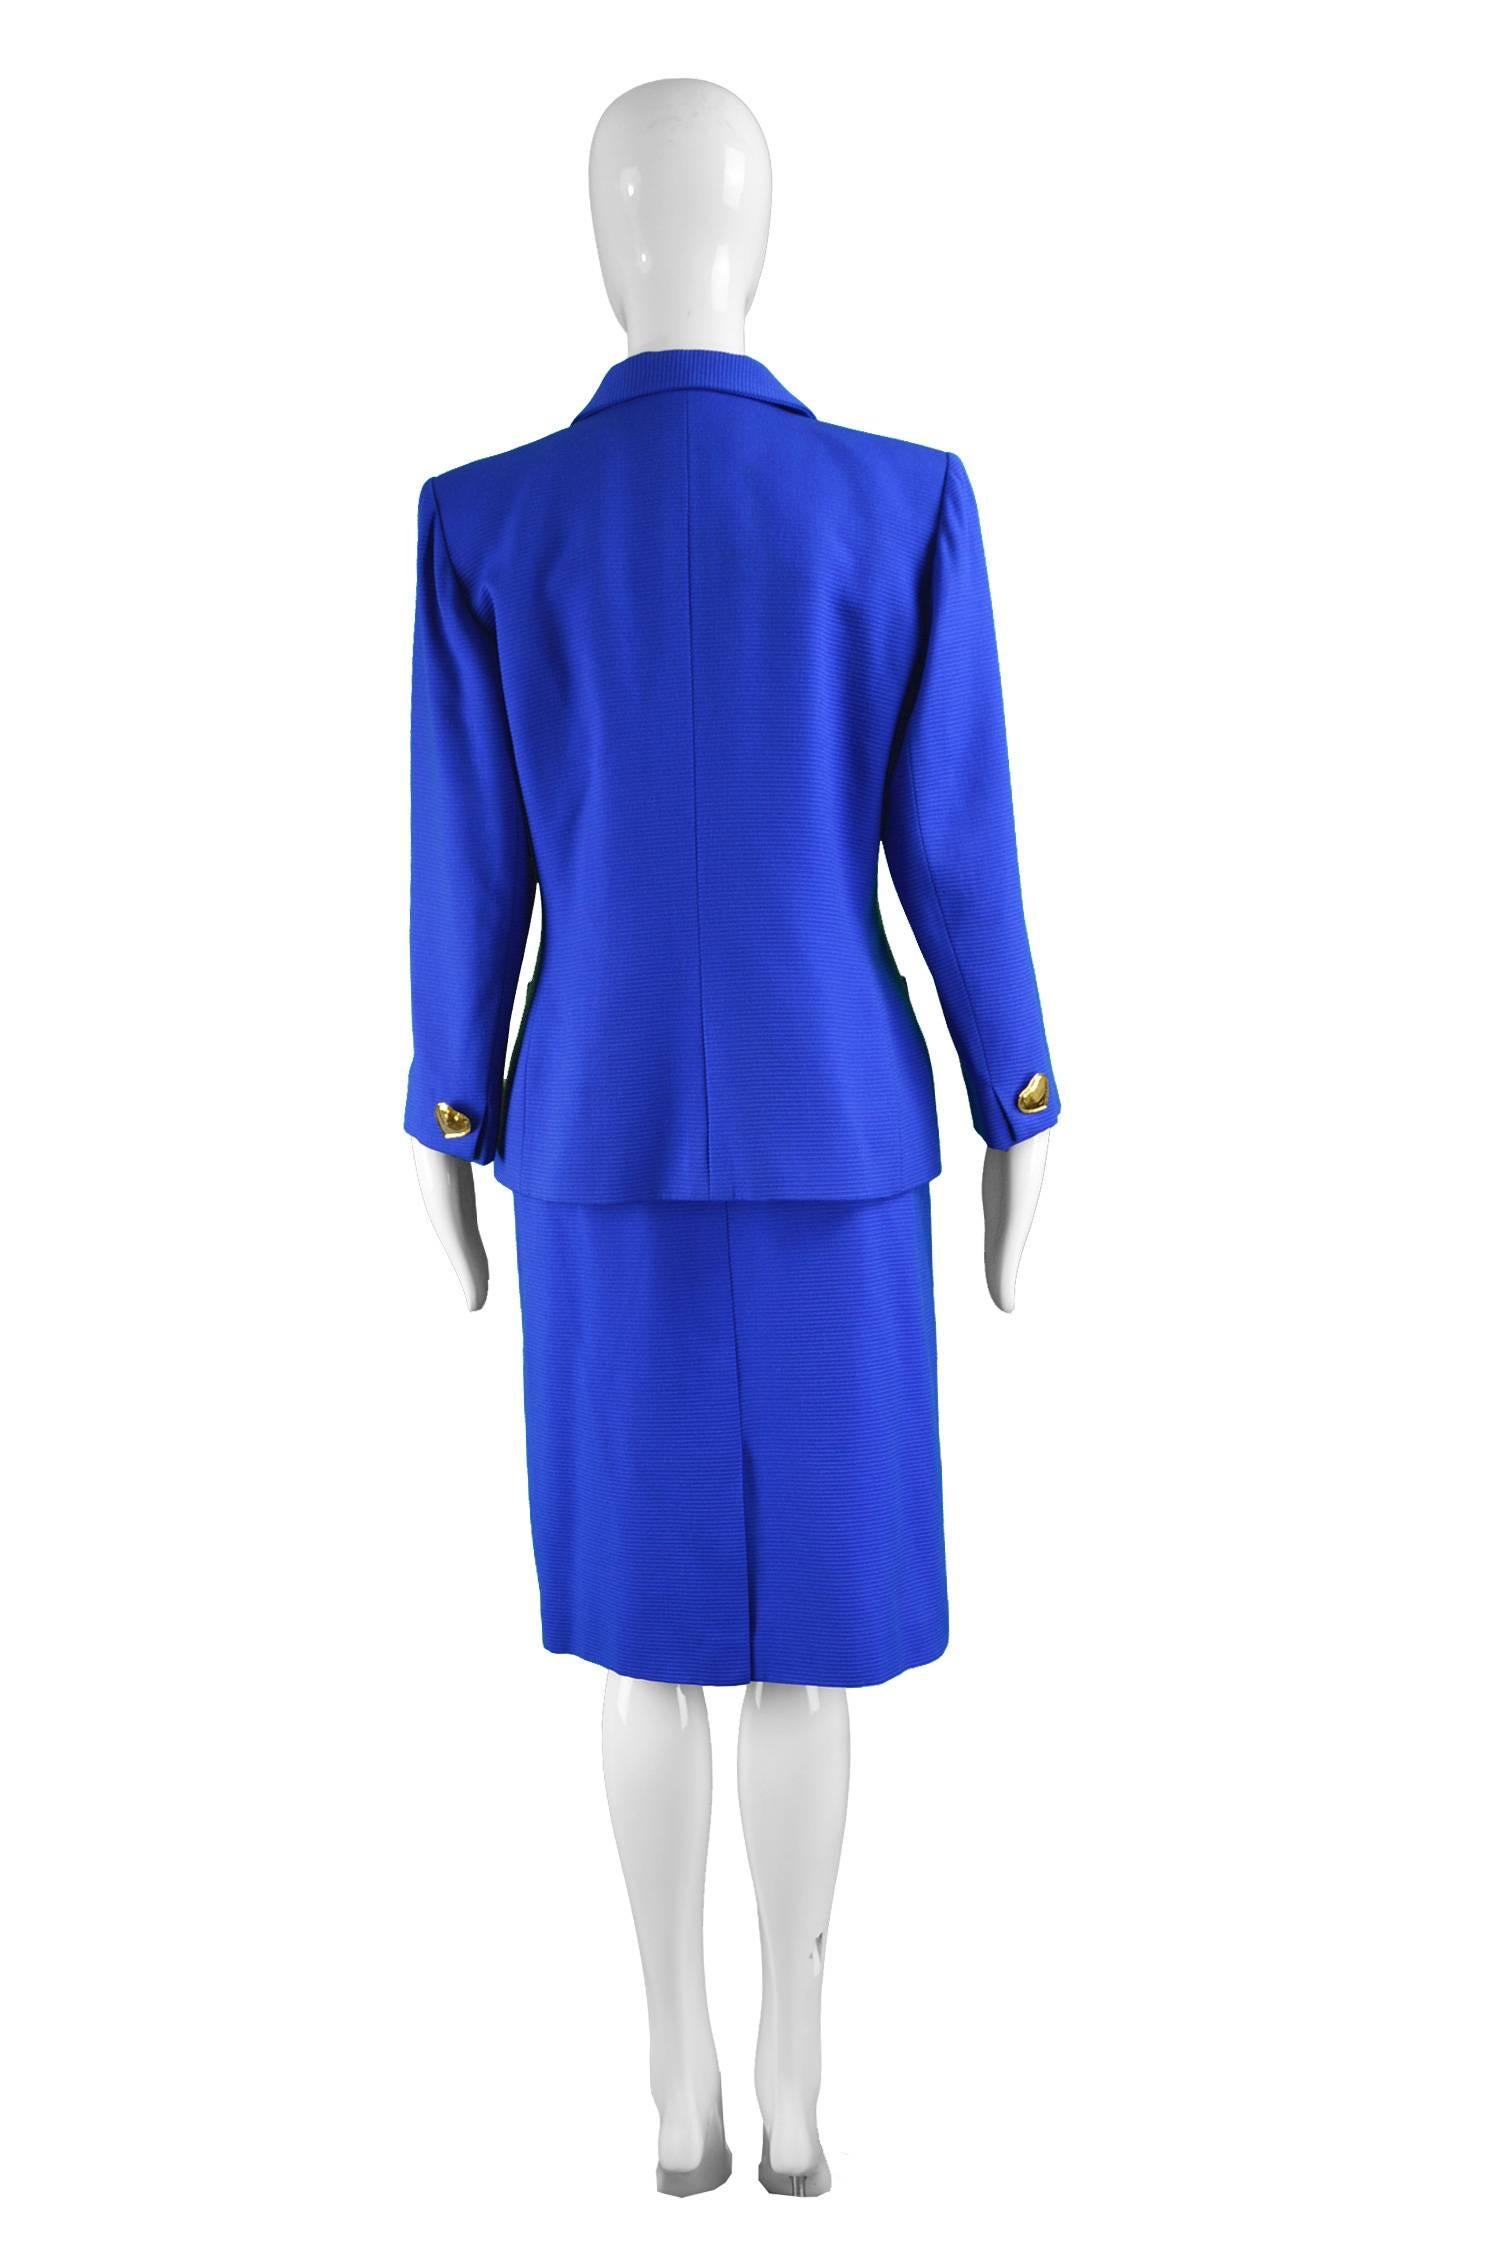 Yves Saint Laurent Blue Wool Blazer and Skirt Suit with Heart Buttons, 1980s 1